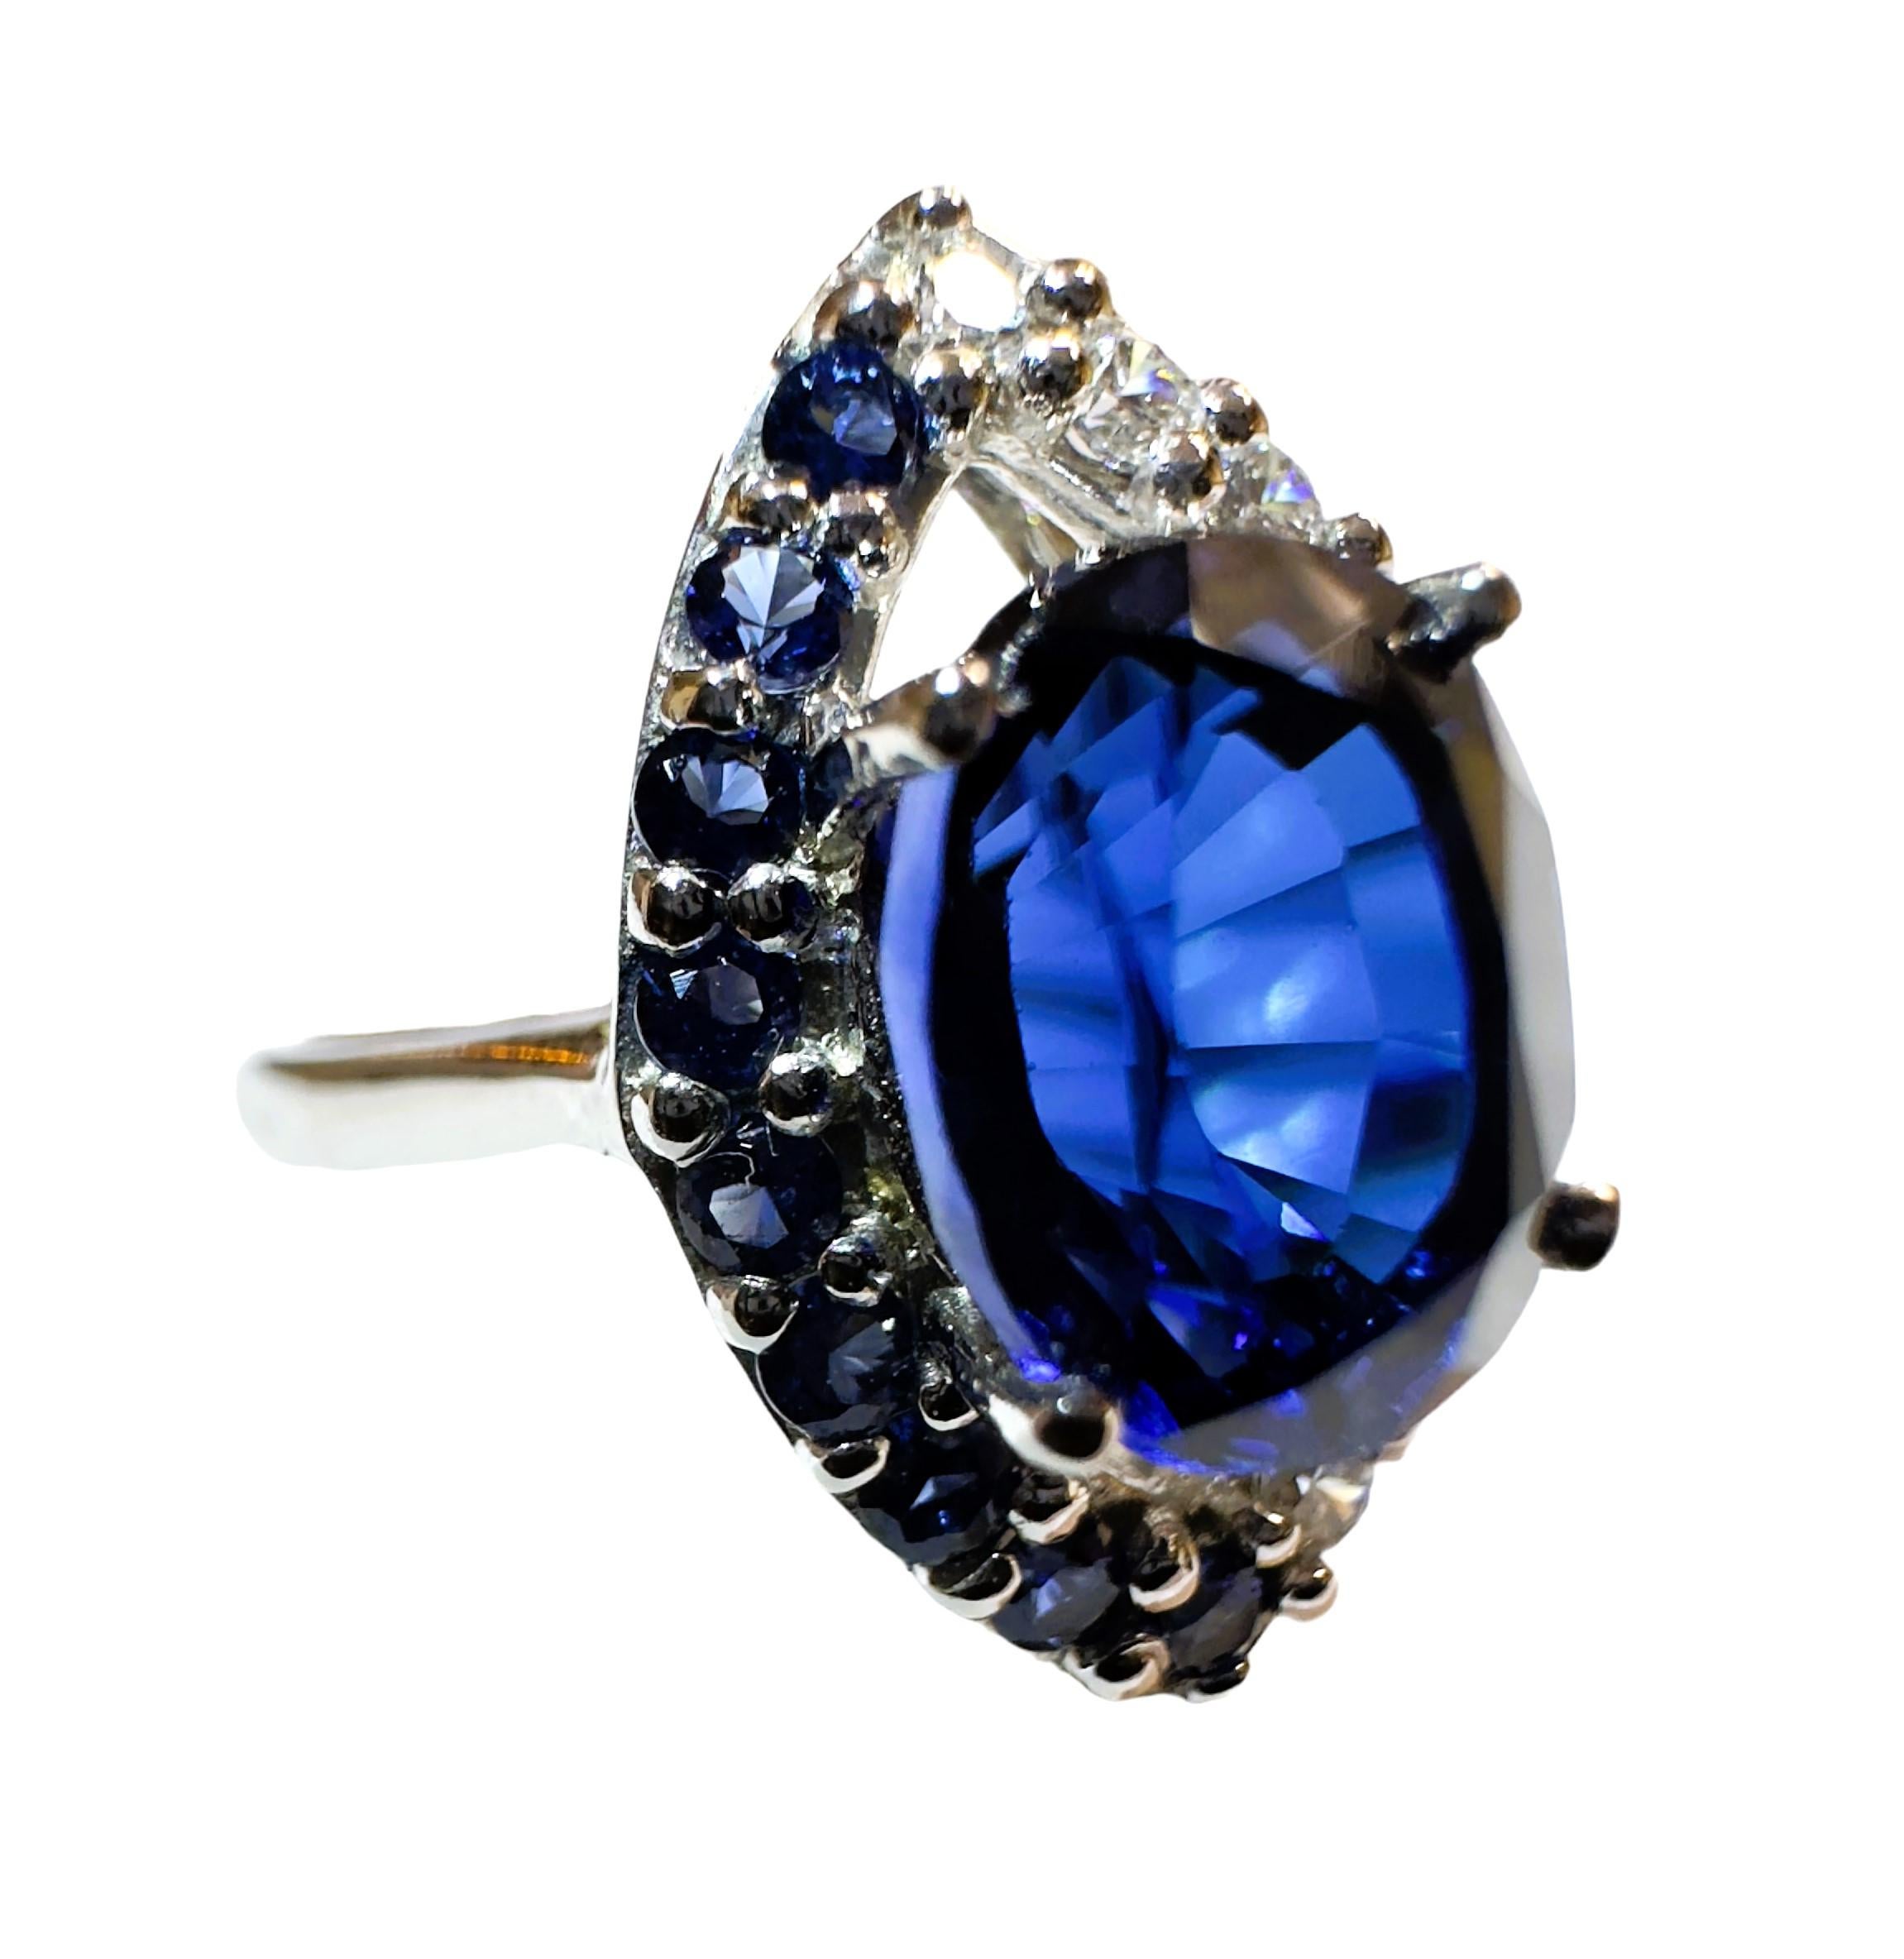 Women's New Handmade African 3.60 Ct Deep Blue Sapphire Sterling Ring Size 6.75 For Sale